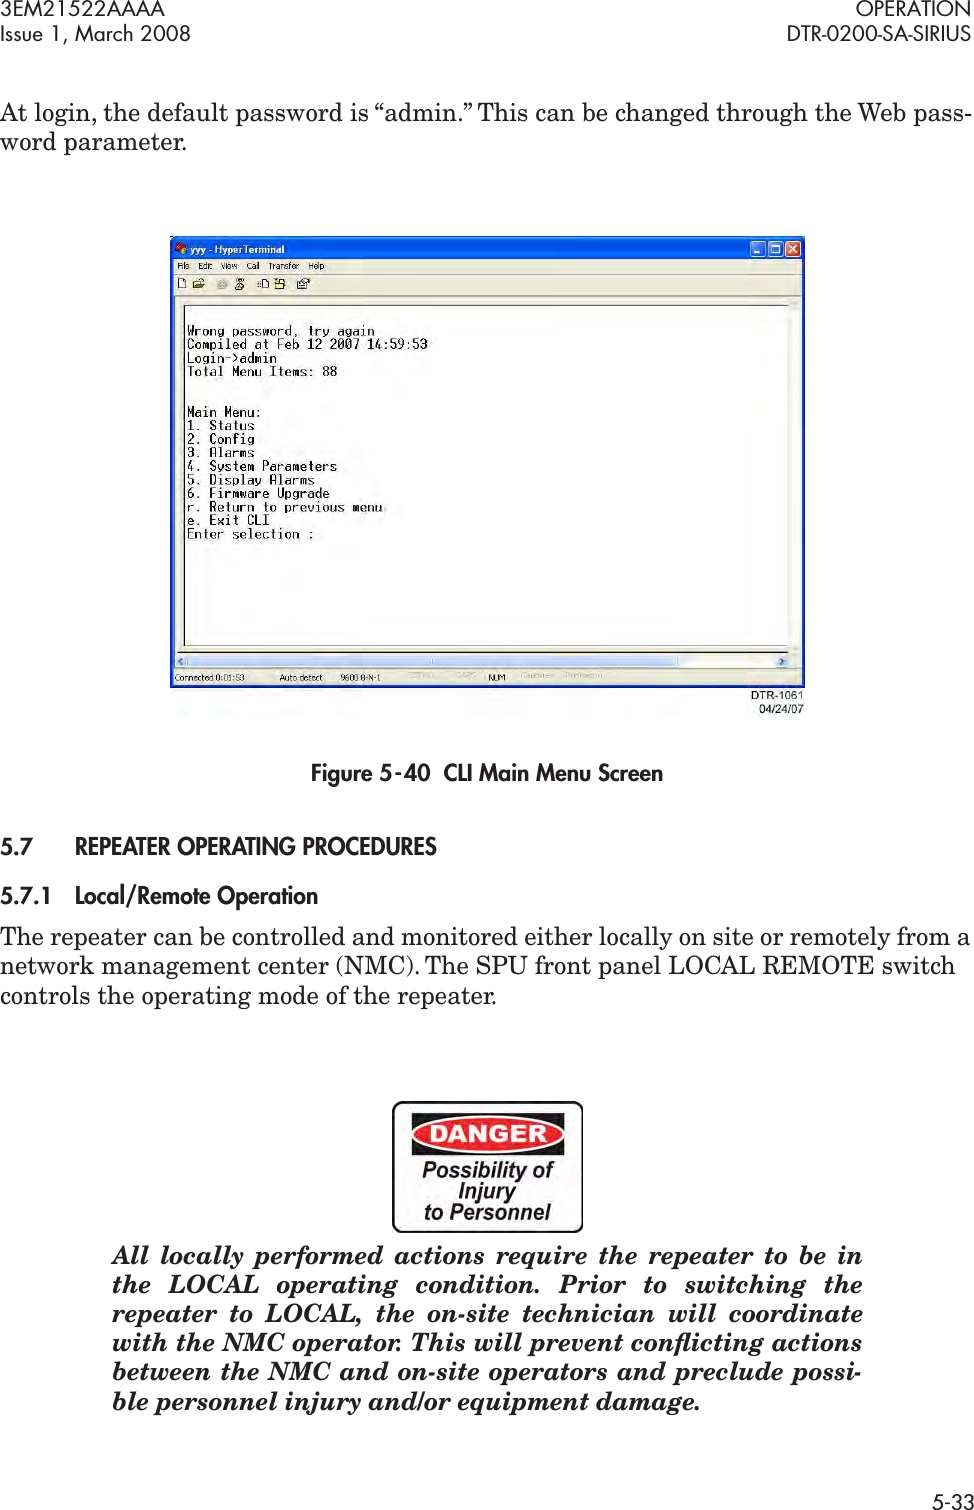 3EM21522AAAA OPERATIONIssue 1, March 2008 DTR-0200-SA-SIRIUS5-33At login, the default password is “admin.” This can be changed through the Web pass-word parameter.Figure 5  -  40  CLI Main Menu Screen5.7REPEATER OPERATING PROCEDURES5.7.1Local/Remote OperationThe repeater can be controlled and monitored either locally on site or remotely from a network management center (NMC). The SPU front panel LOCAL REMOTE switch controls the operating mode of the repeater. All locally performed actions require the repeater to be in the LOCAL operating condition. Prior to switching the repeater to LOCAL, the on-site technician will coordinate with the NMC operator. This will prevent conﬂicting actions between the NMC and on-site operators and preclude possi-ble personnel injury and/or equipment damage.